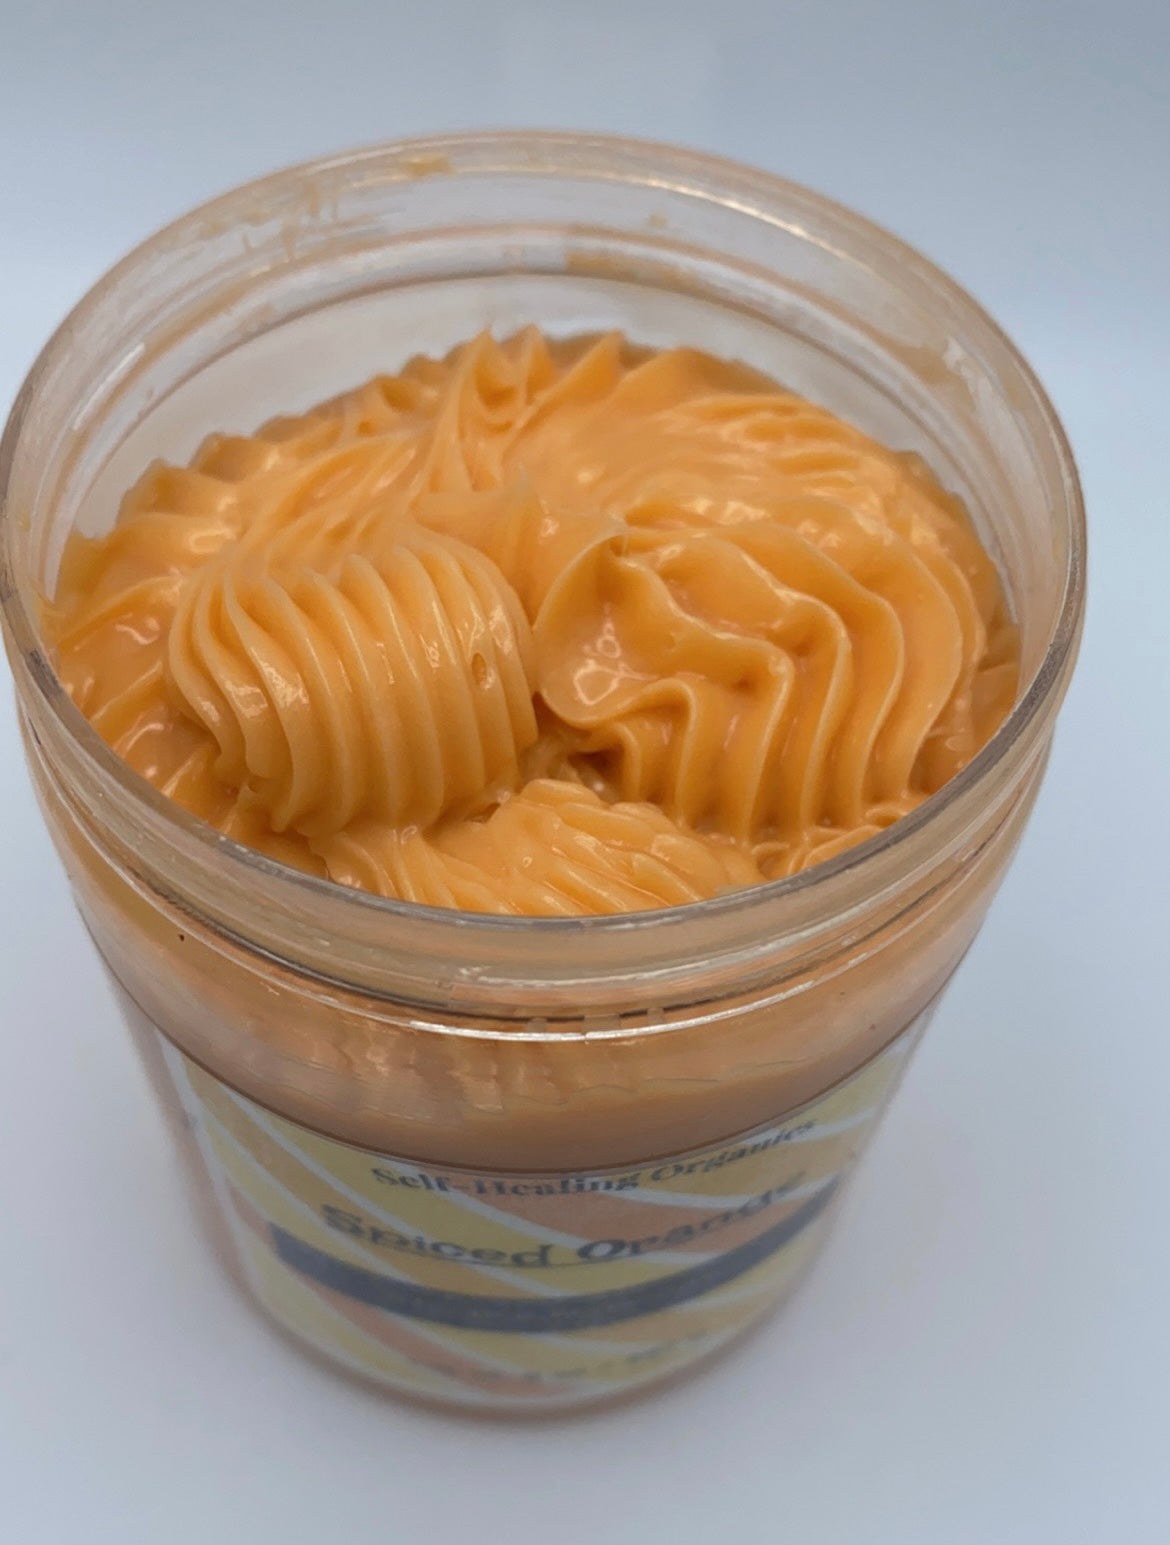 Spiced Orange Whipped Body Butter is made with 100% Organic Ingredients. Safe for All Skin Types. The benefits of using this body butter may help retain moisture and nourish the skin!